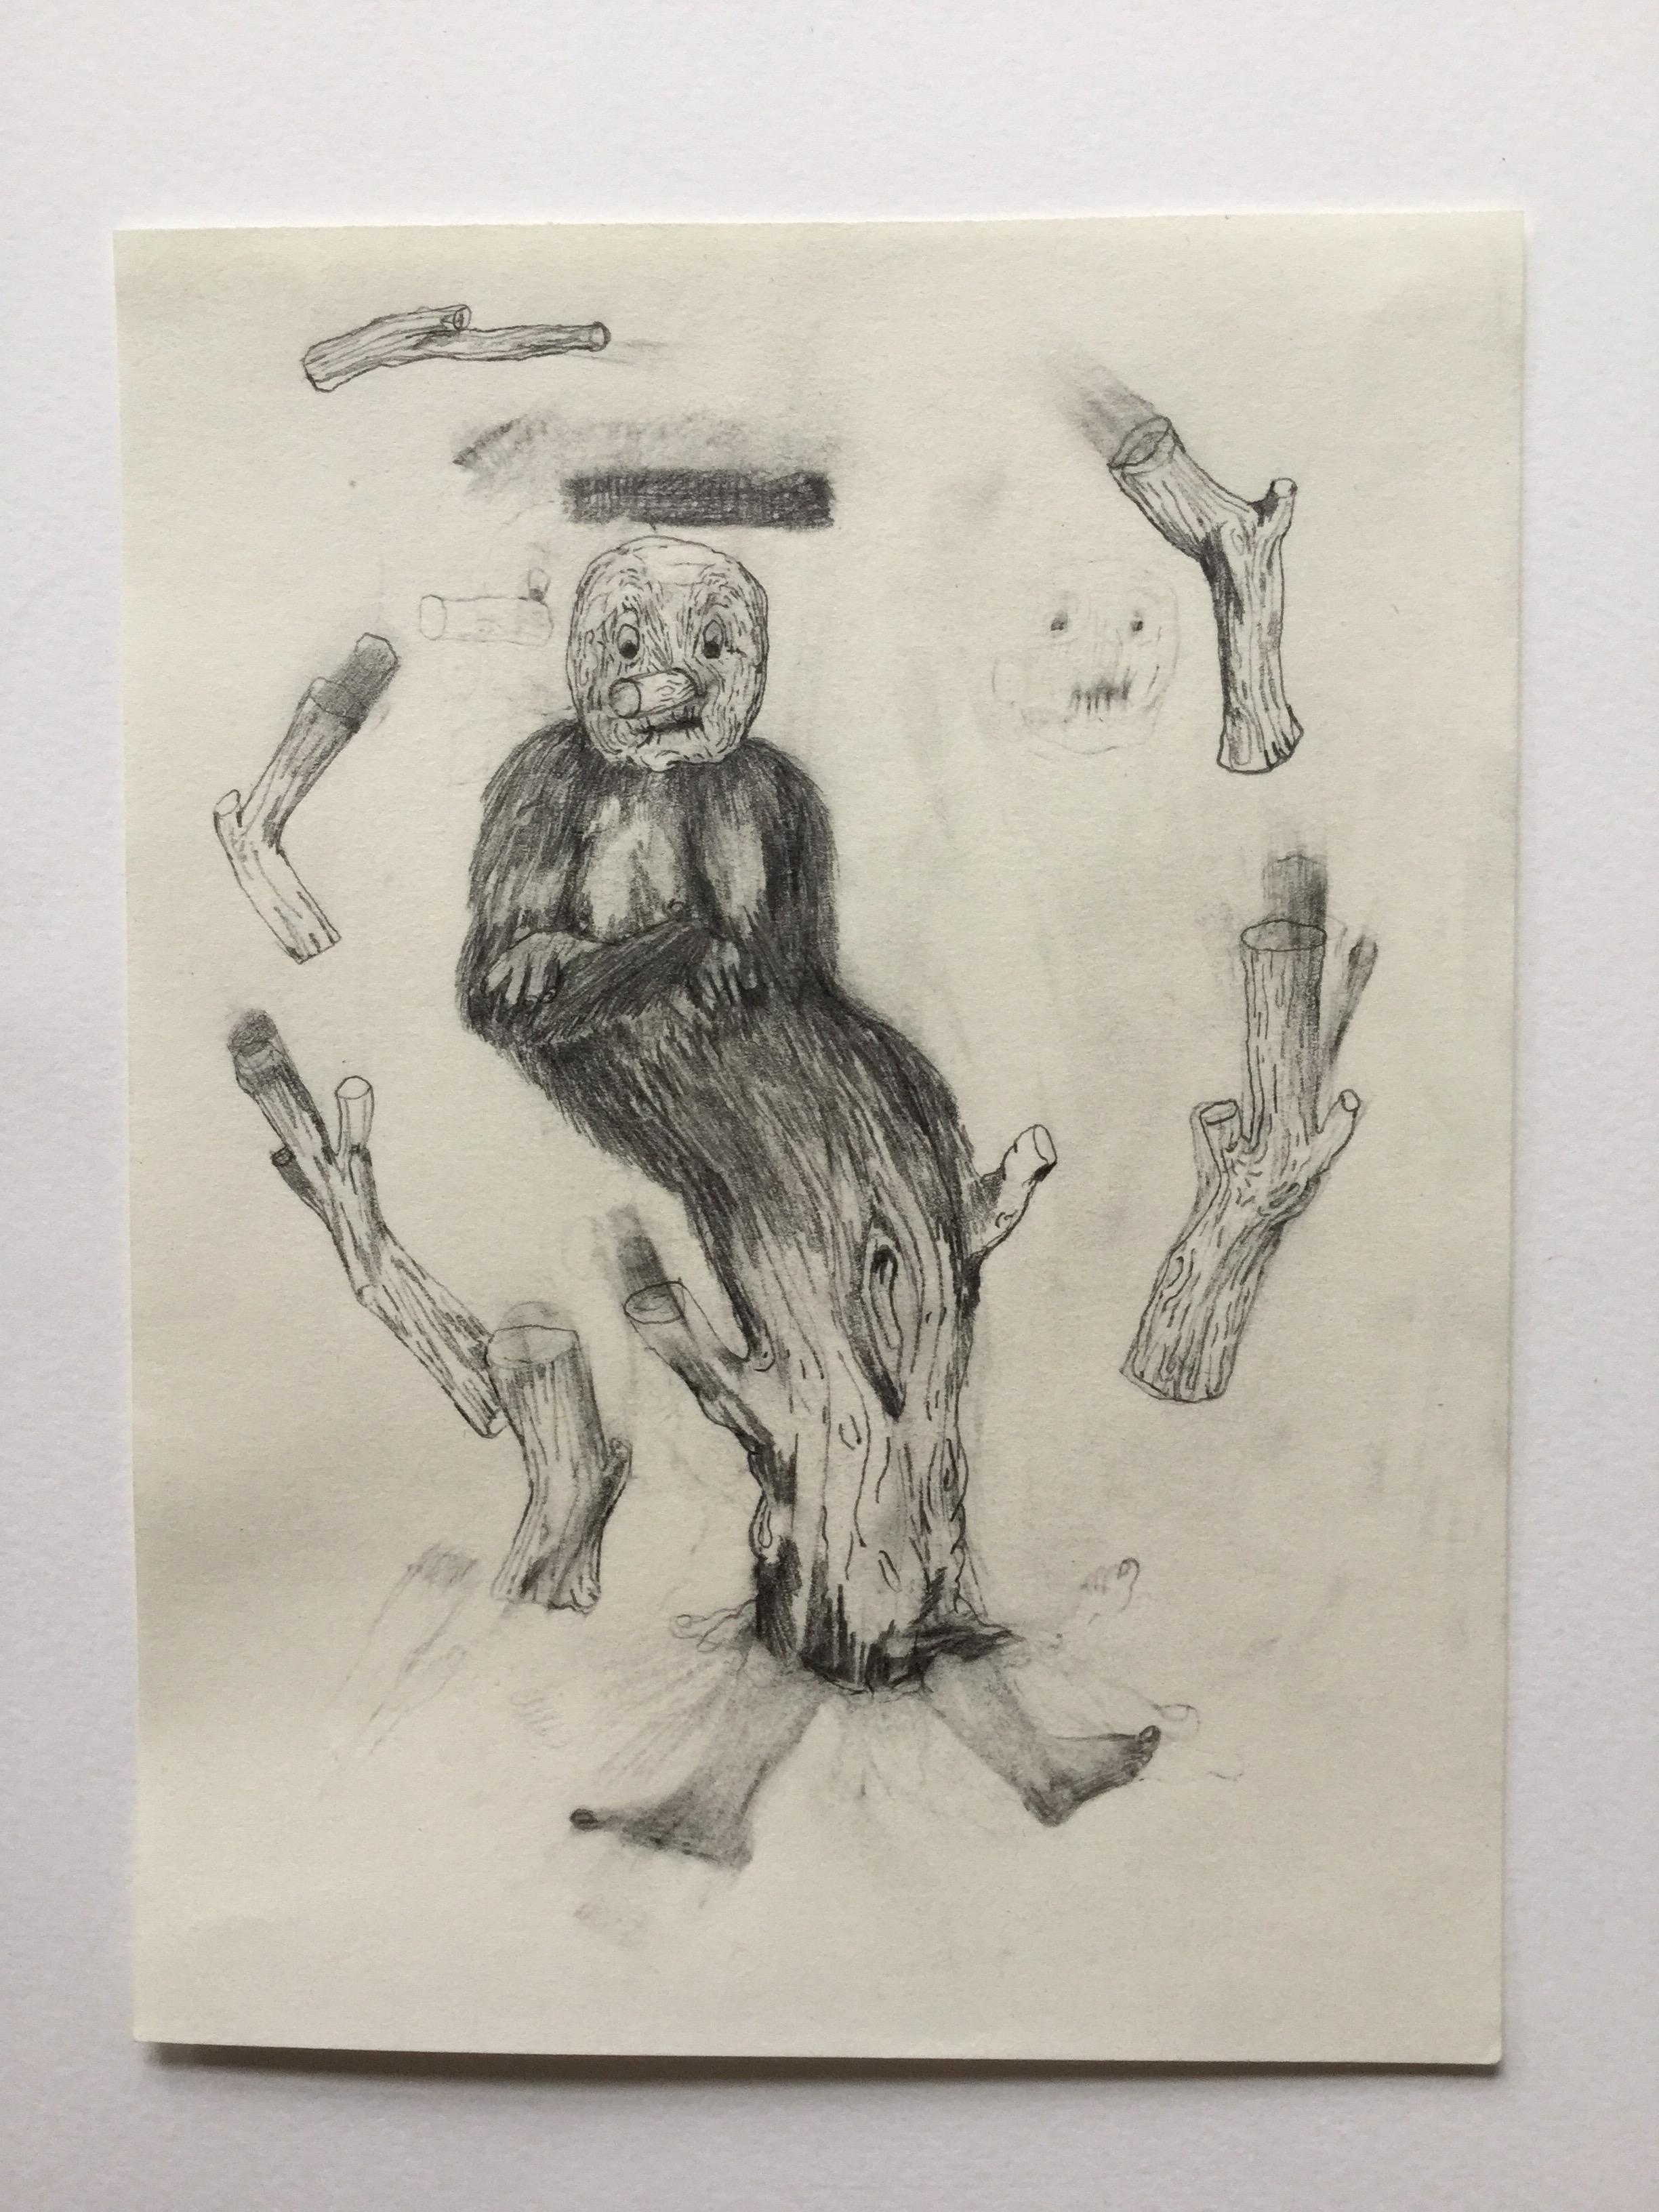 Stump [Lop-Sided], pencil on paper, Kate Lyddon 2015